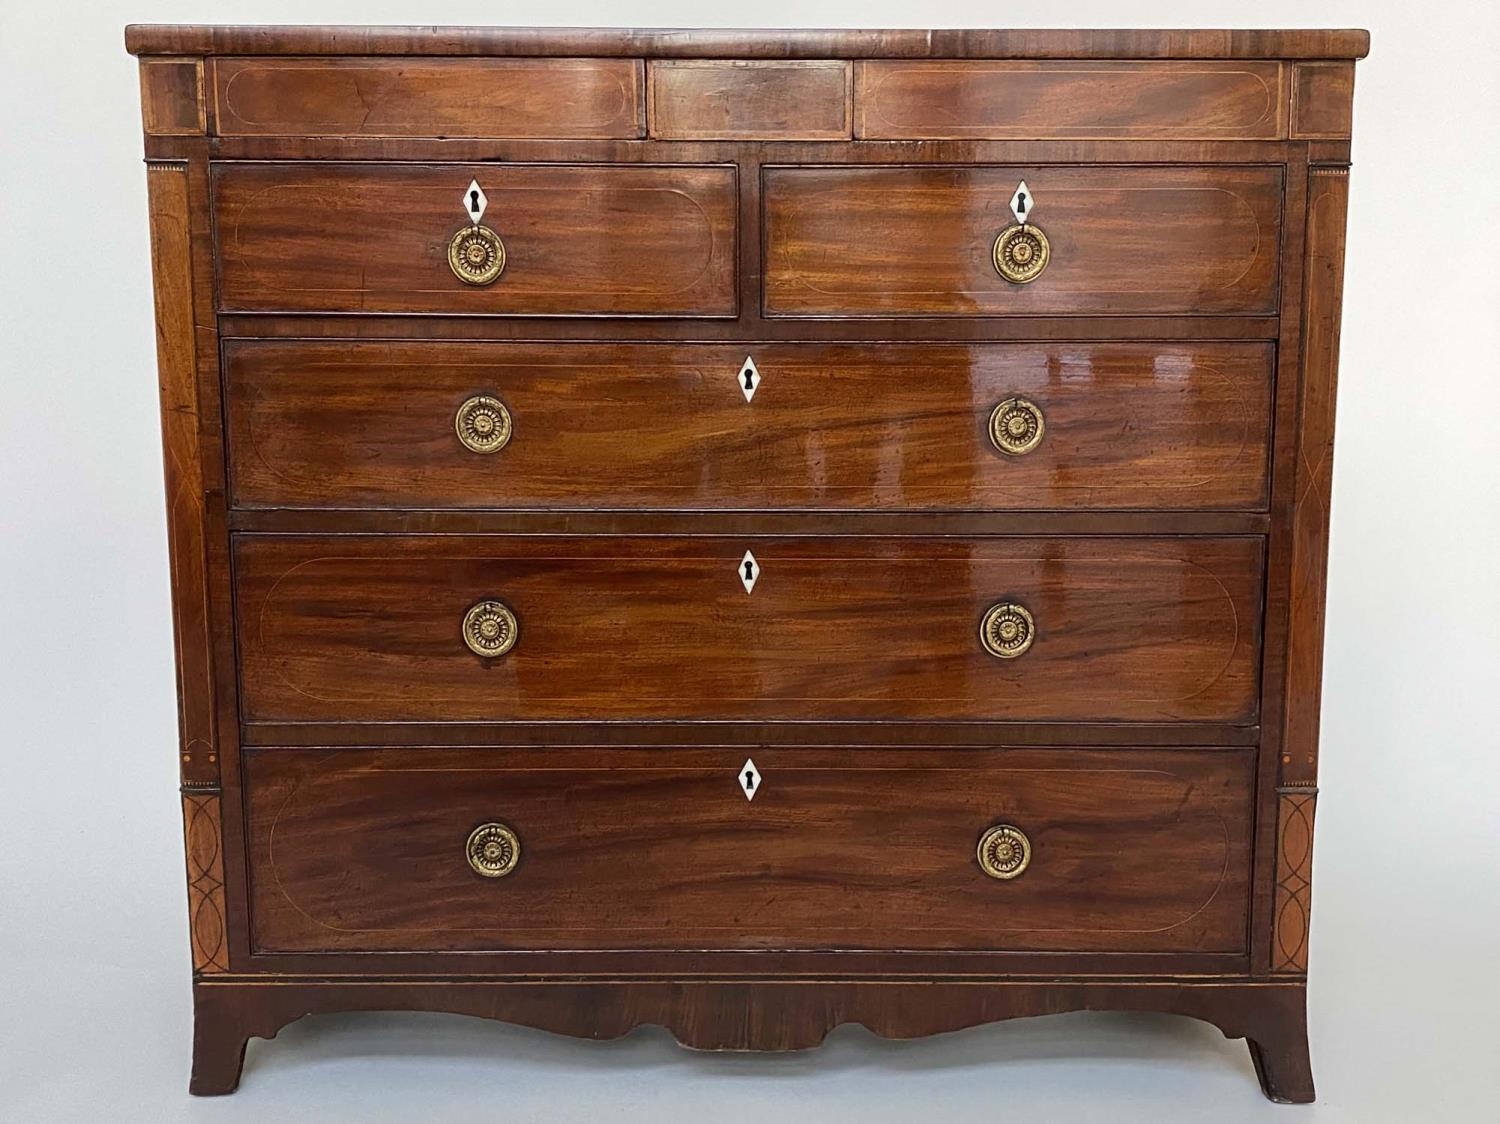 SCOTTISH HALL CHEST, early 19th century flamed mahogany of adapted shallow proportions with two